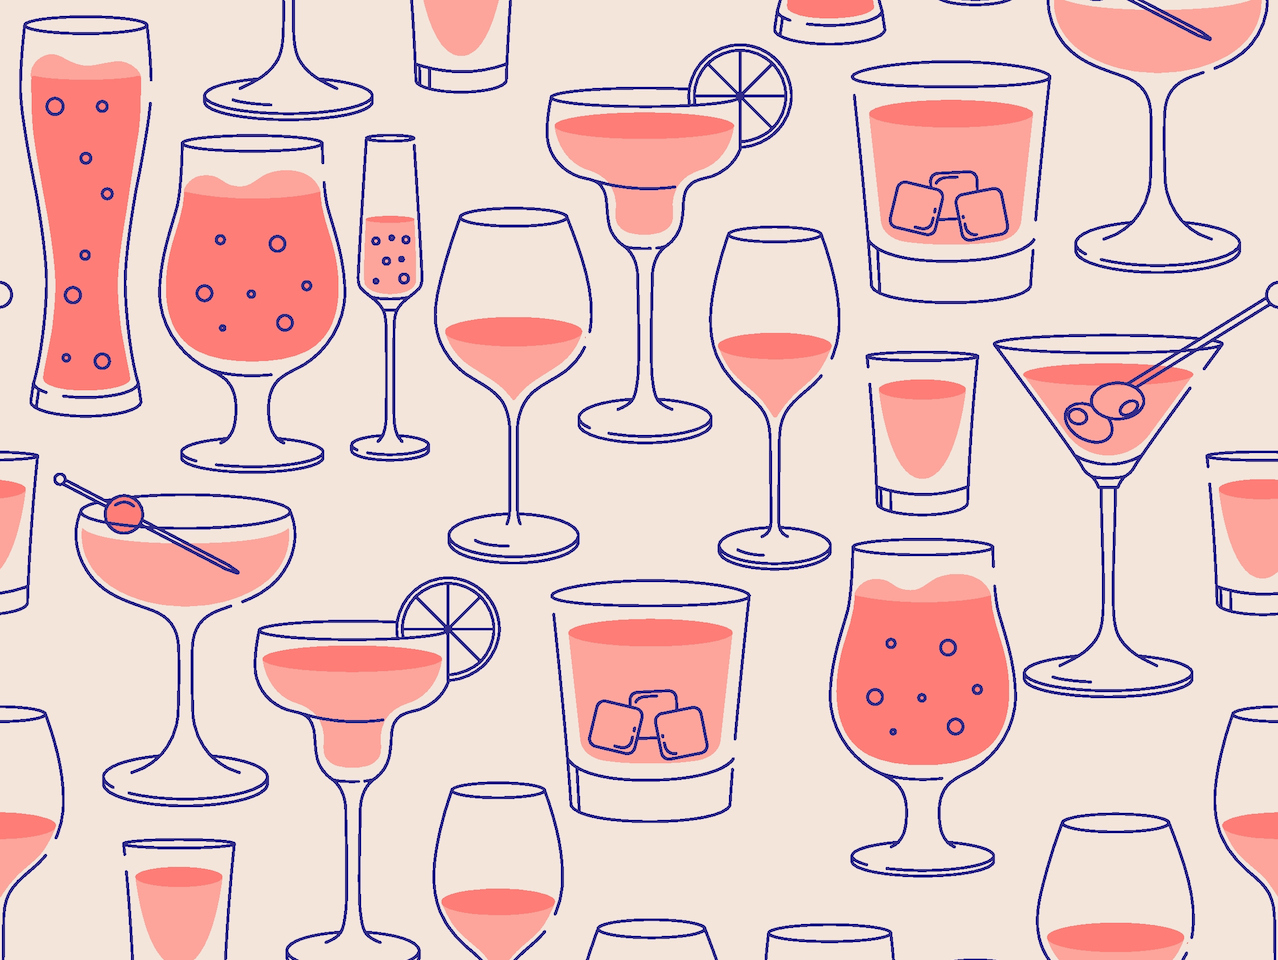 Illustration of different shapes of glasses filled with pink liquid.